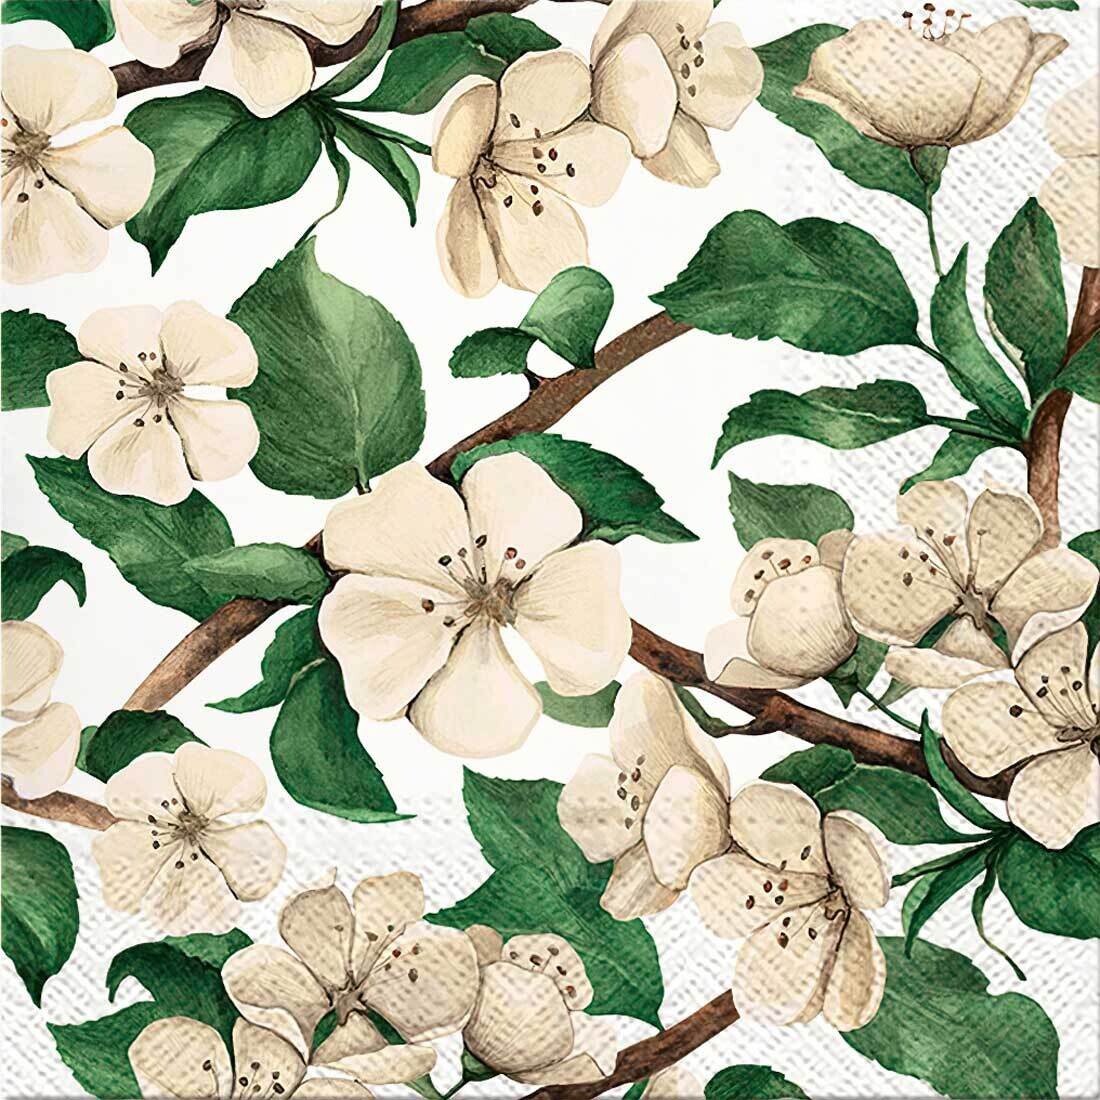 Decoupage Paper Napkins - Floral - Apple Blossoms (1 Sheet) Out of stock